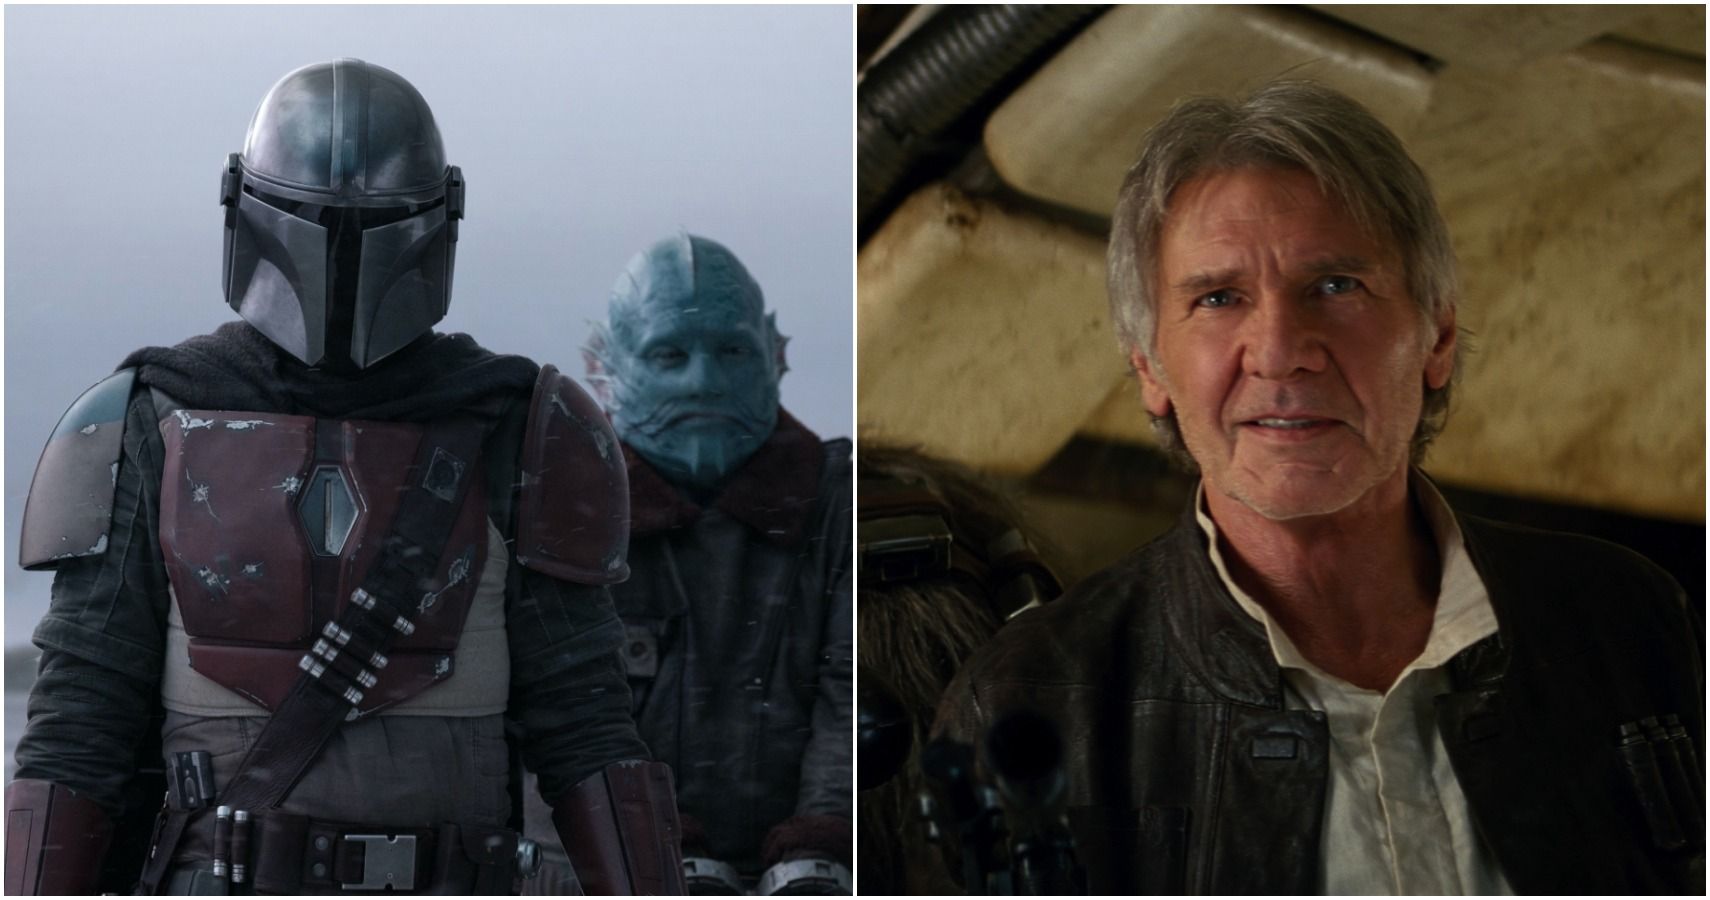 Star Wars 7 Ways The Mandalorian is Better Than The New Movies (& 8 Ways it’s Not)